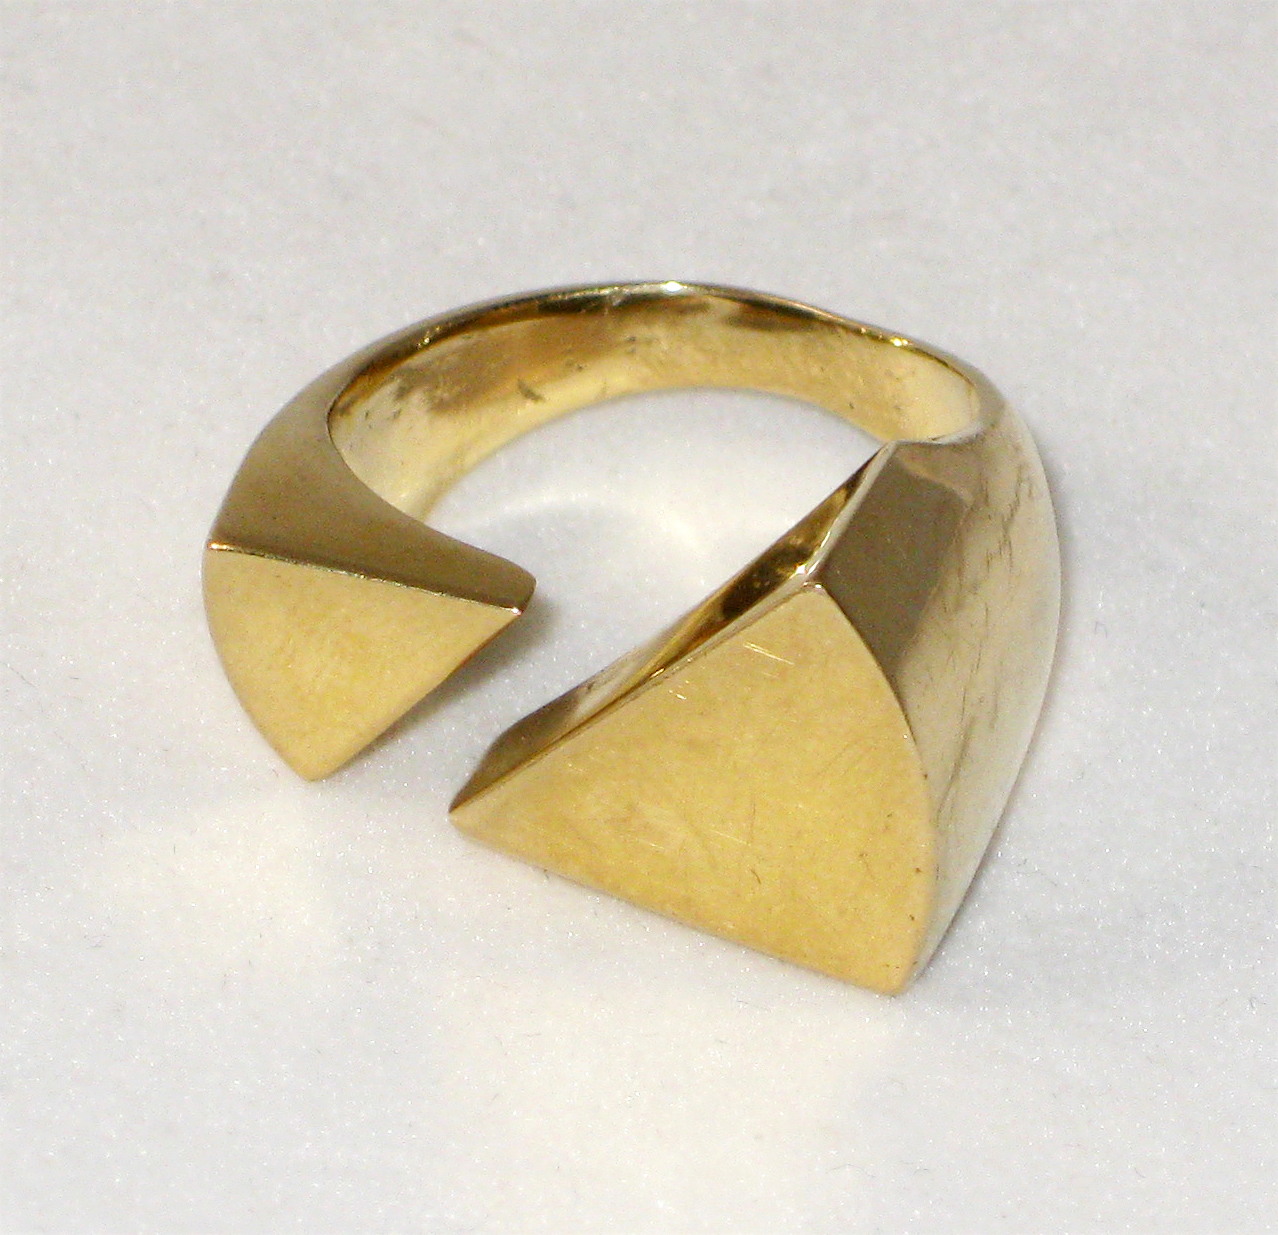 Modernist Double triangle 18K gold ring, c. 1990’s